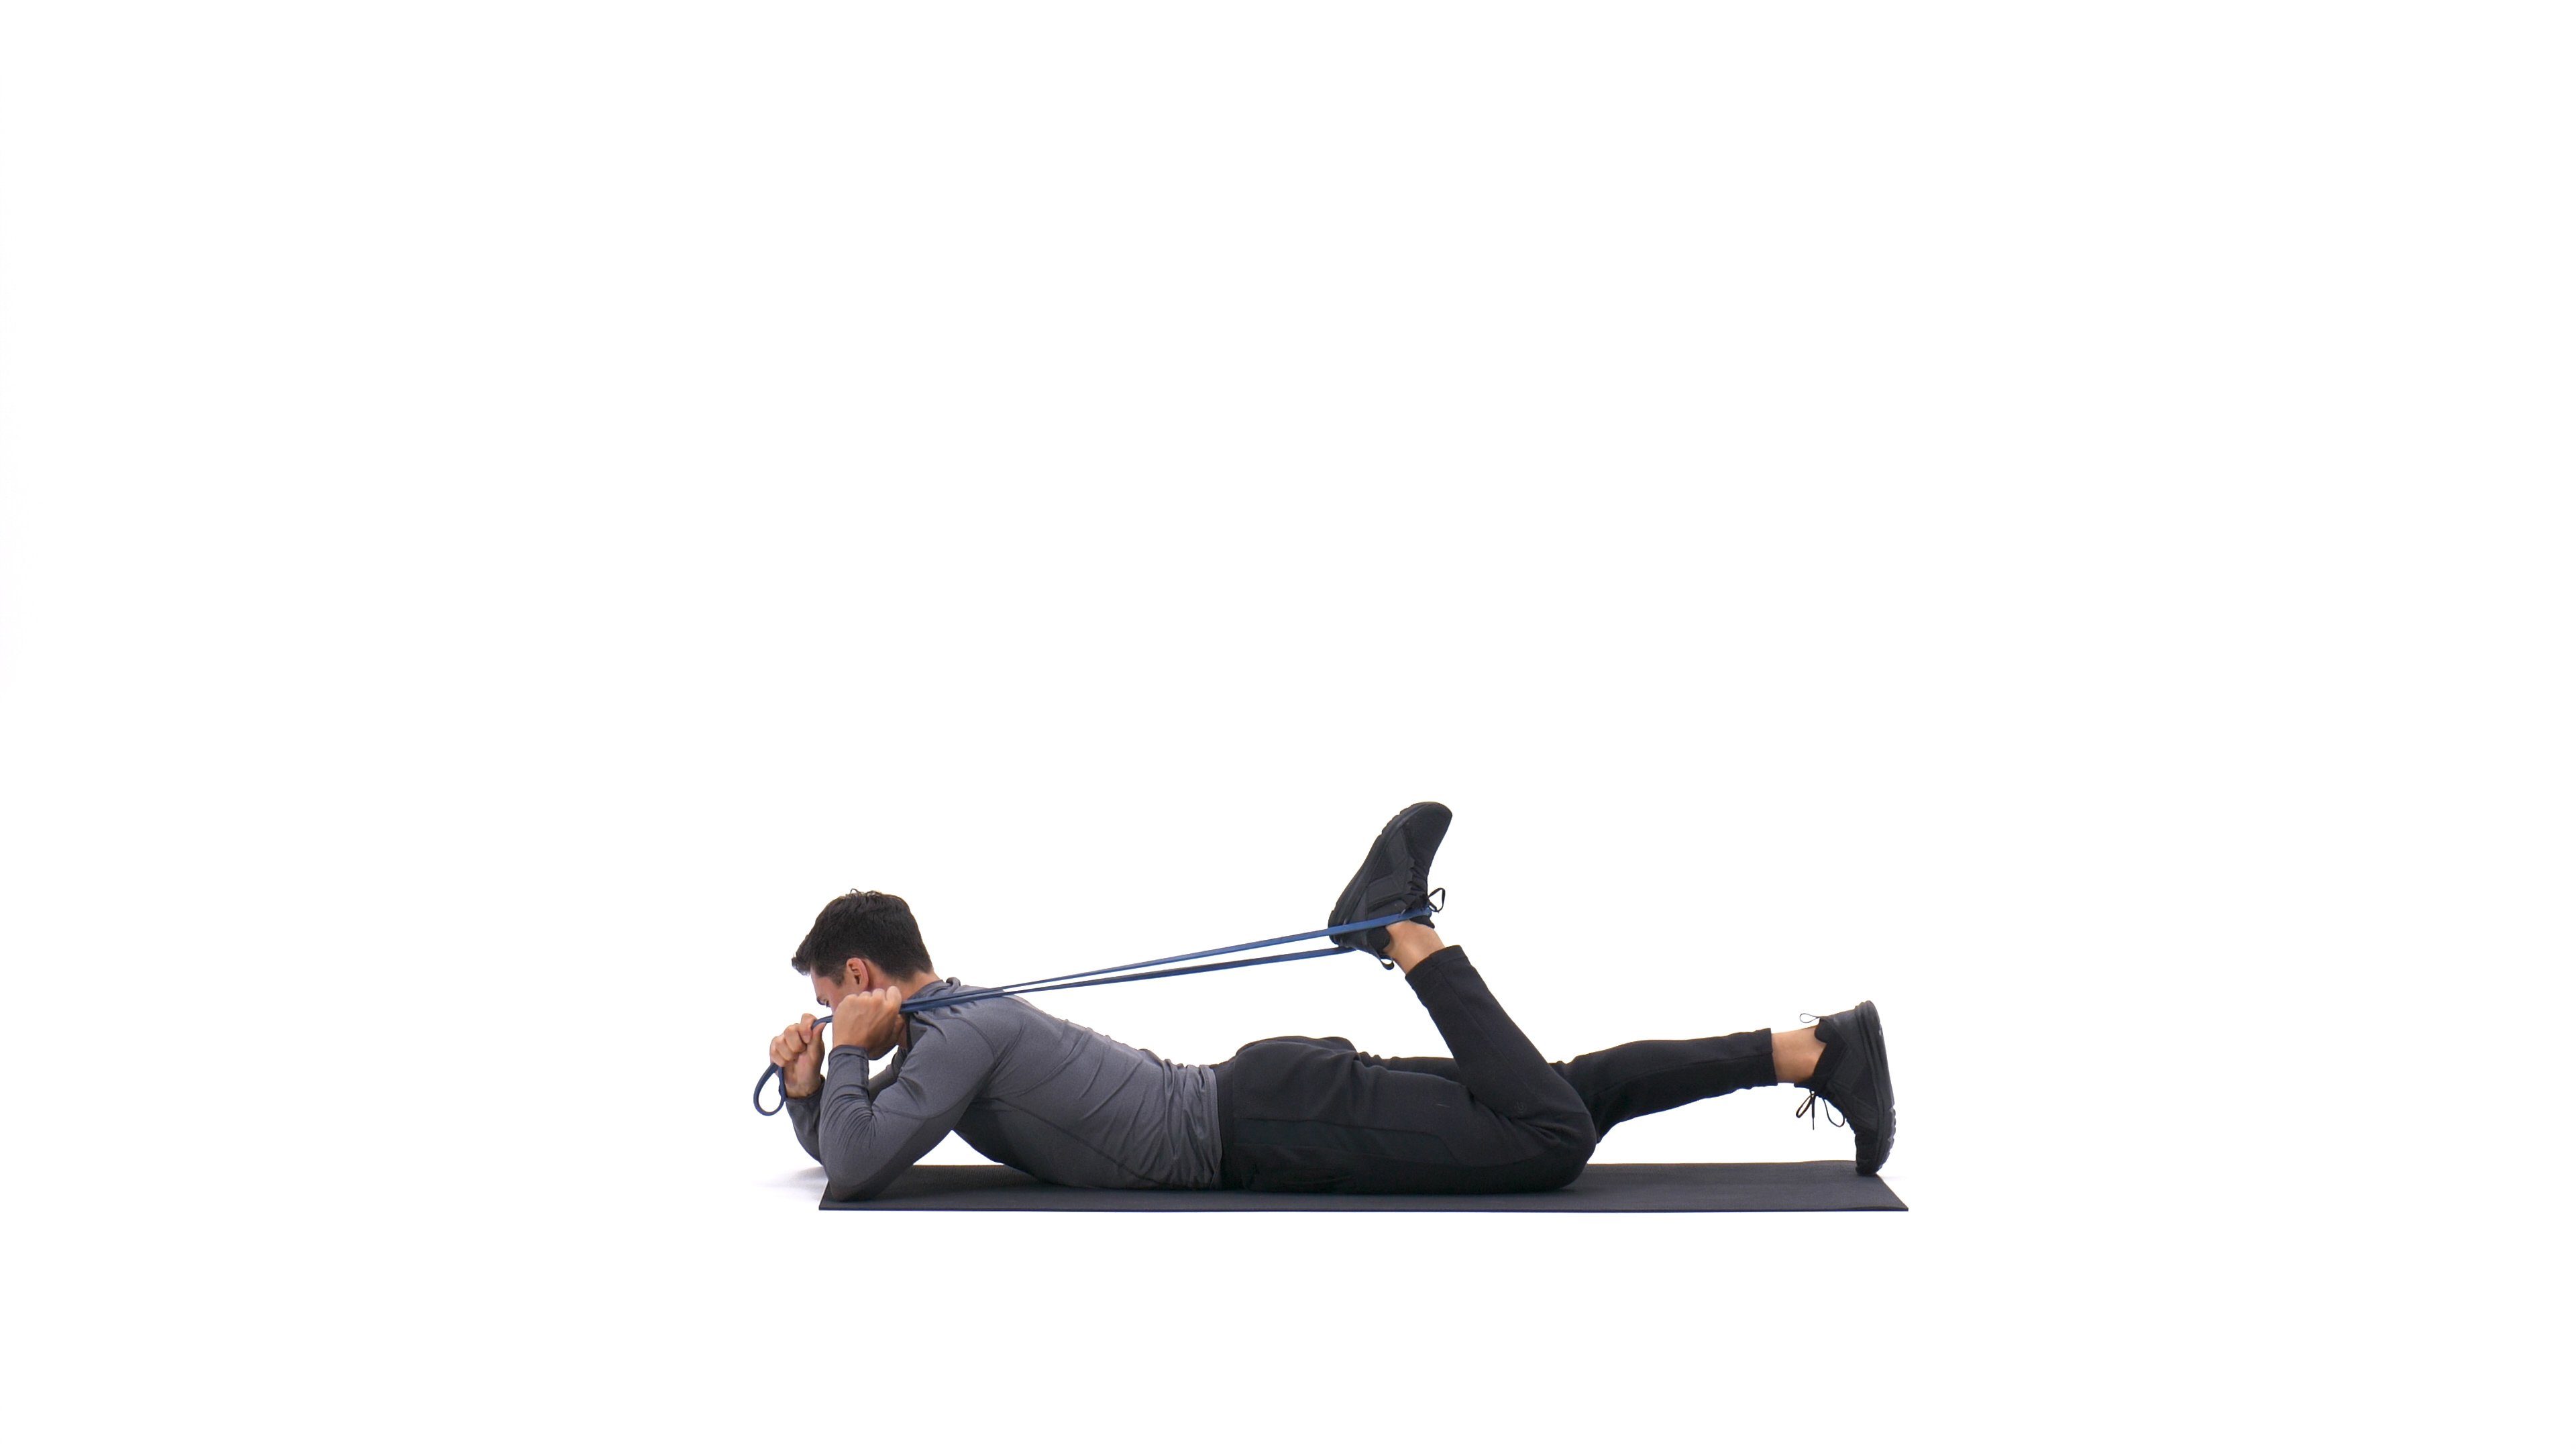 Lying quad stretch with band  Exercise Videos & Guides